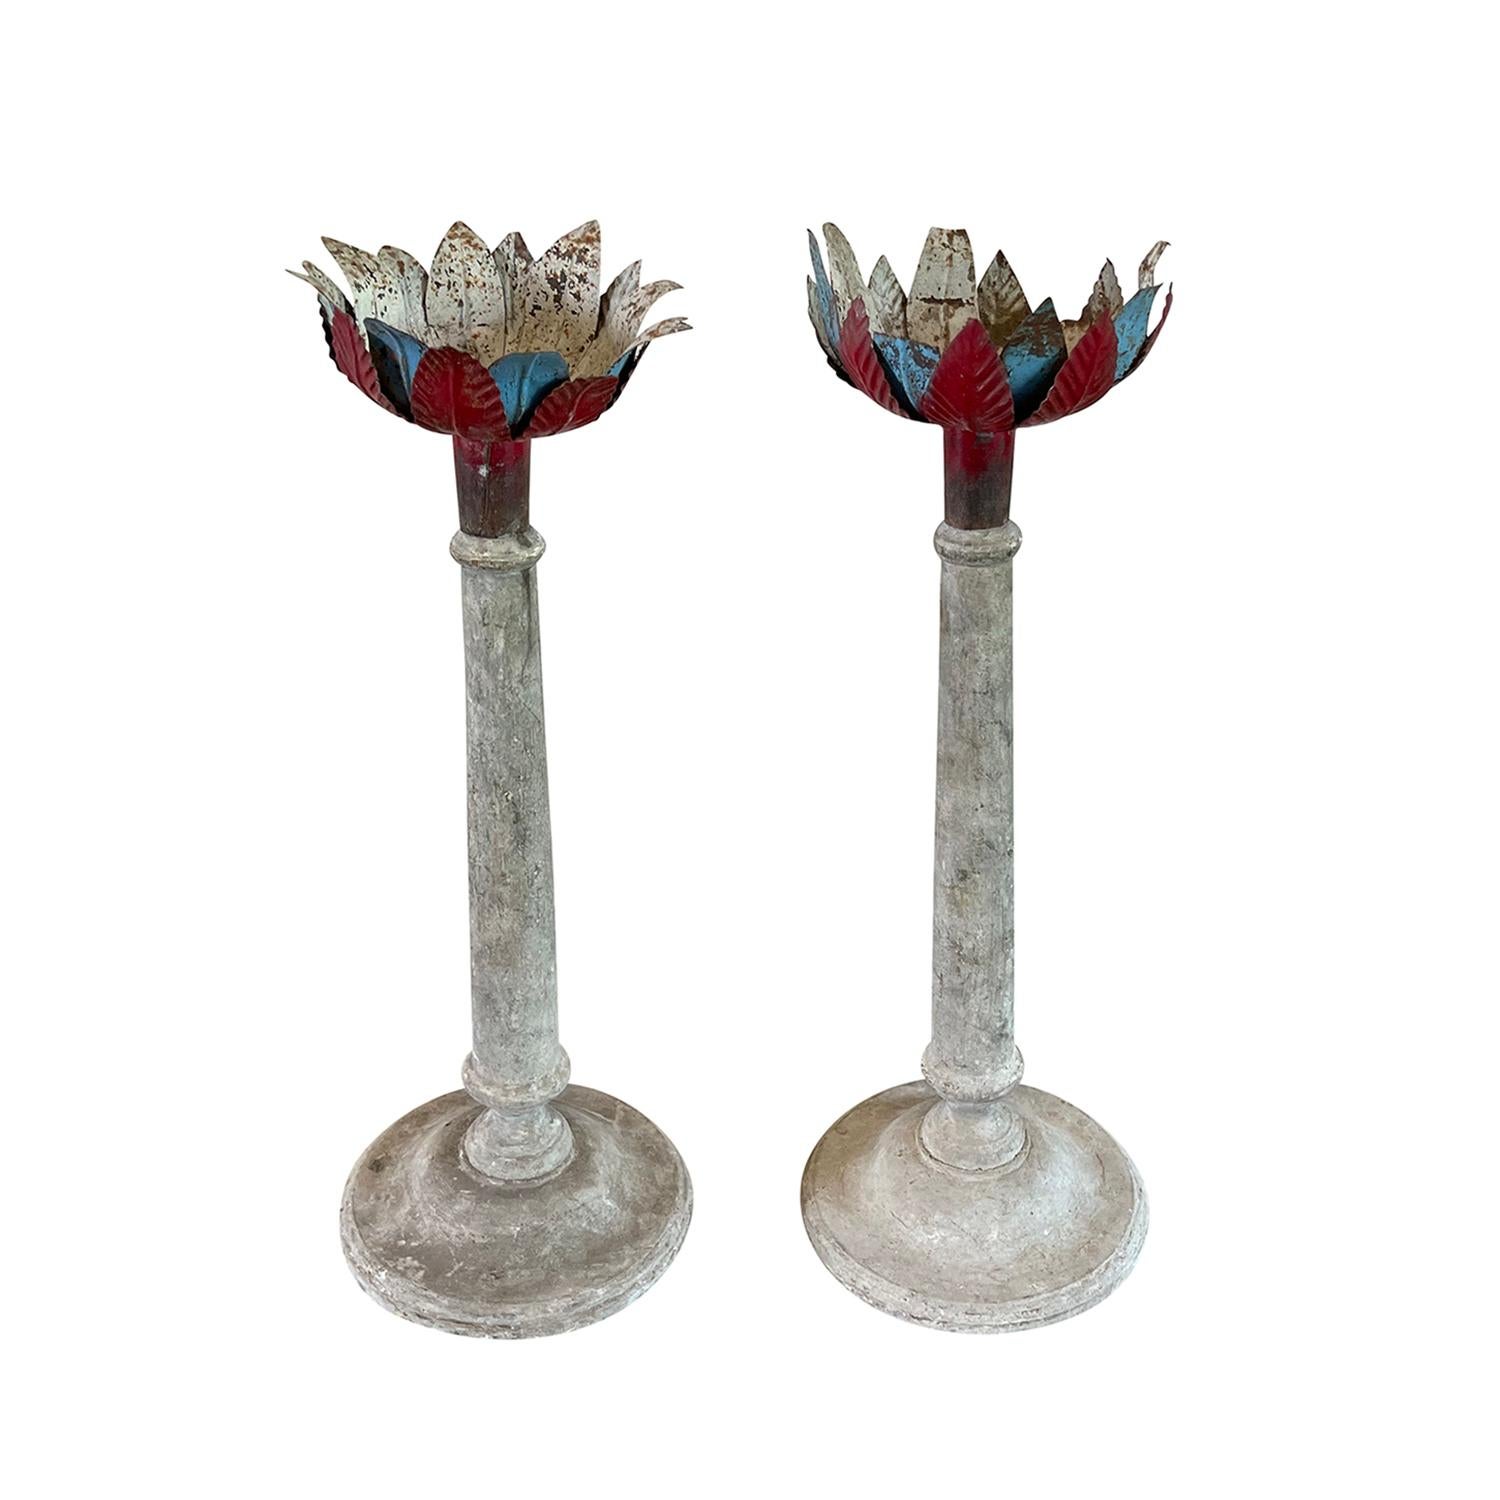 An antique Portuguese pair of 19th Century candle stick holders with a simple Pinewood structure on a round circular base, in good condition. The finely hand crafted metal plates are made of staggered oxblood red and vibrant blue leaved. Original